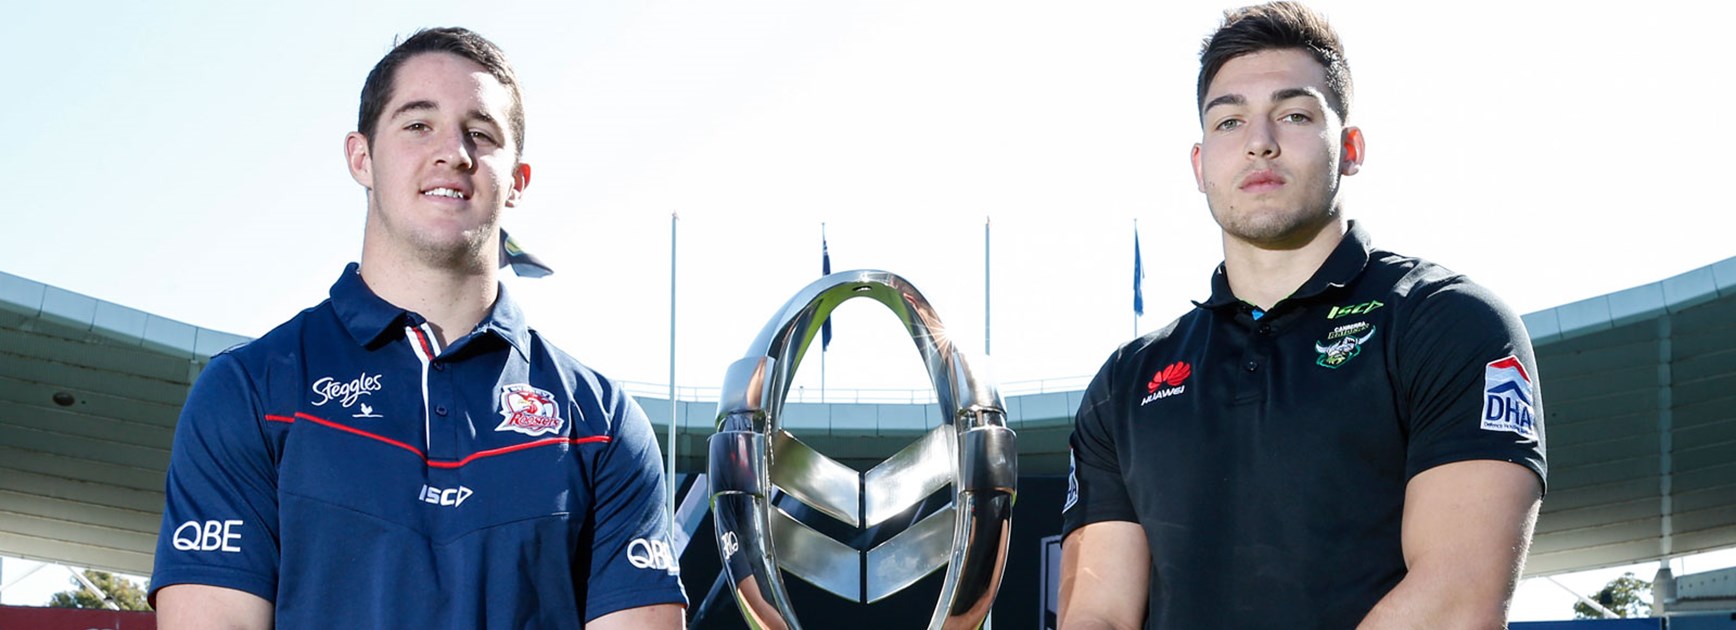 The Roosters and Raiders meet in the first week of the 2016 Holden Cup Finals Series.